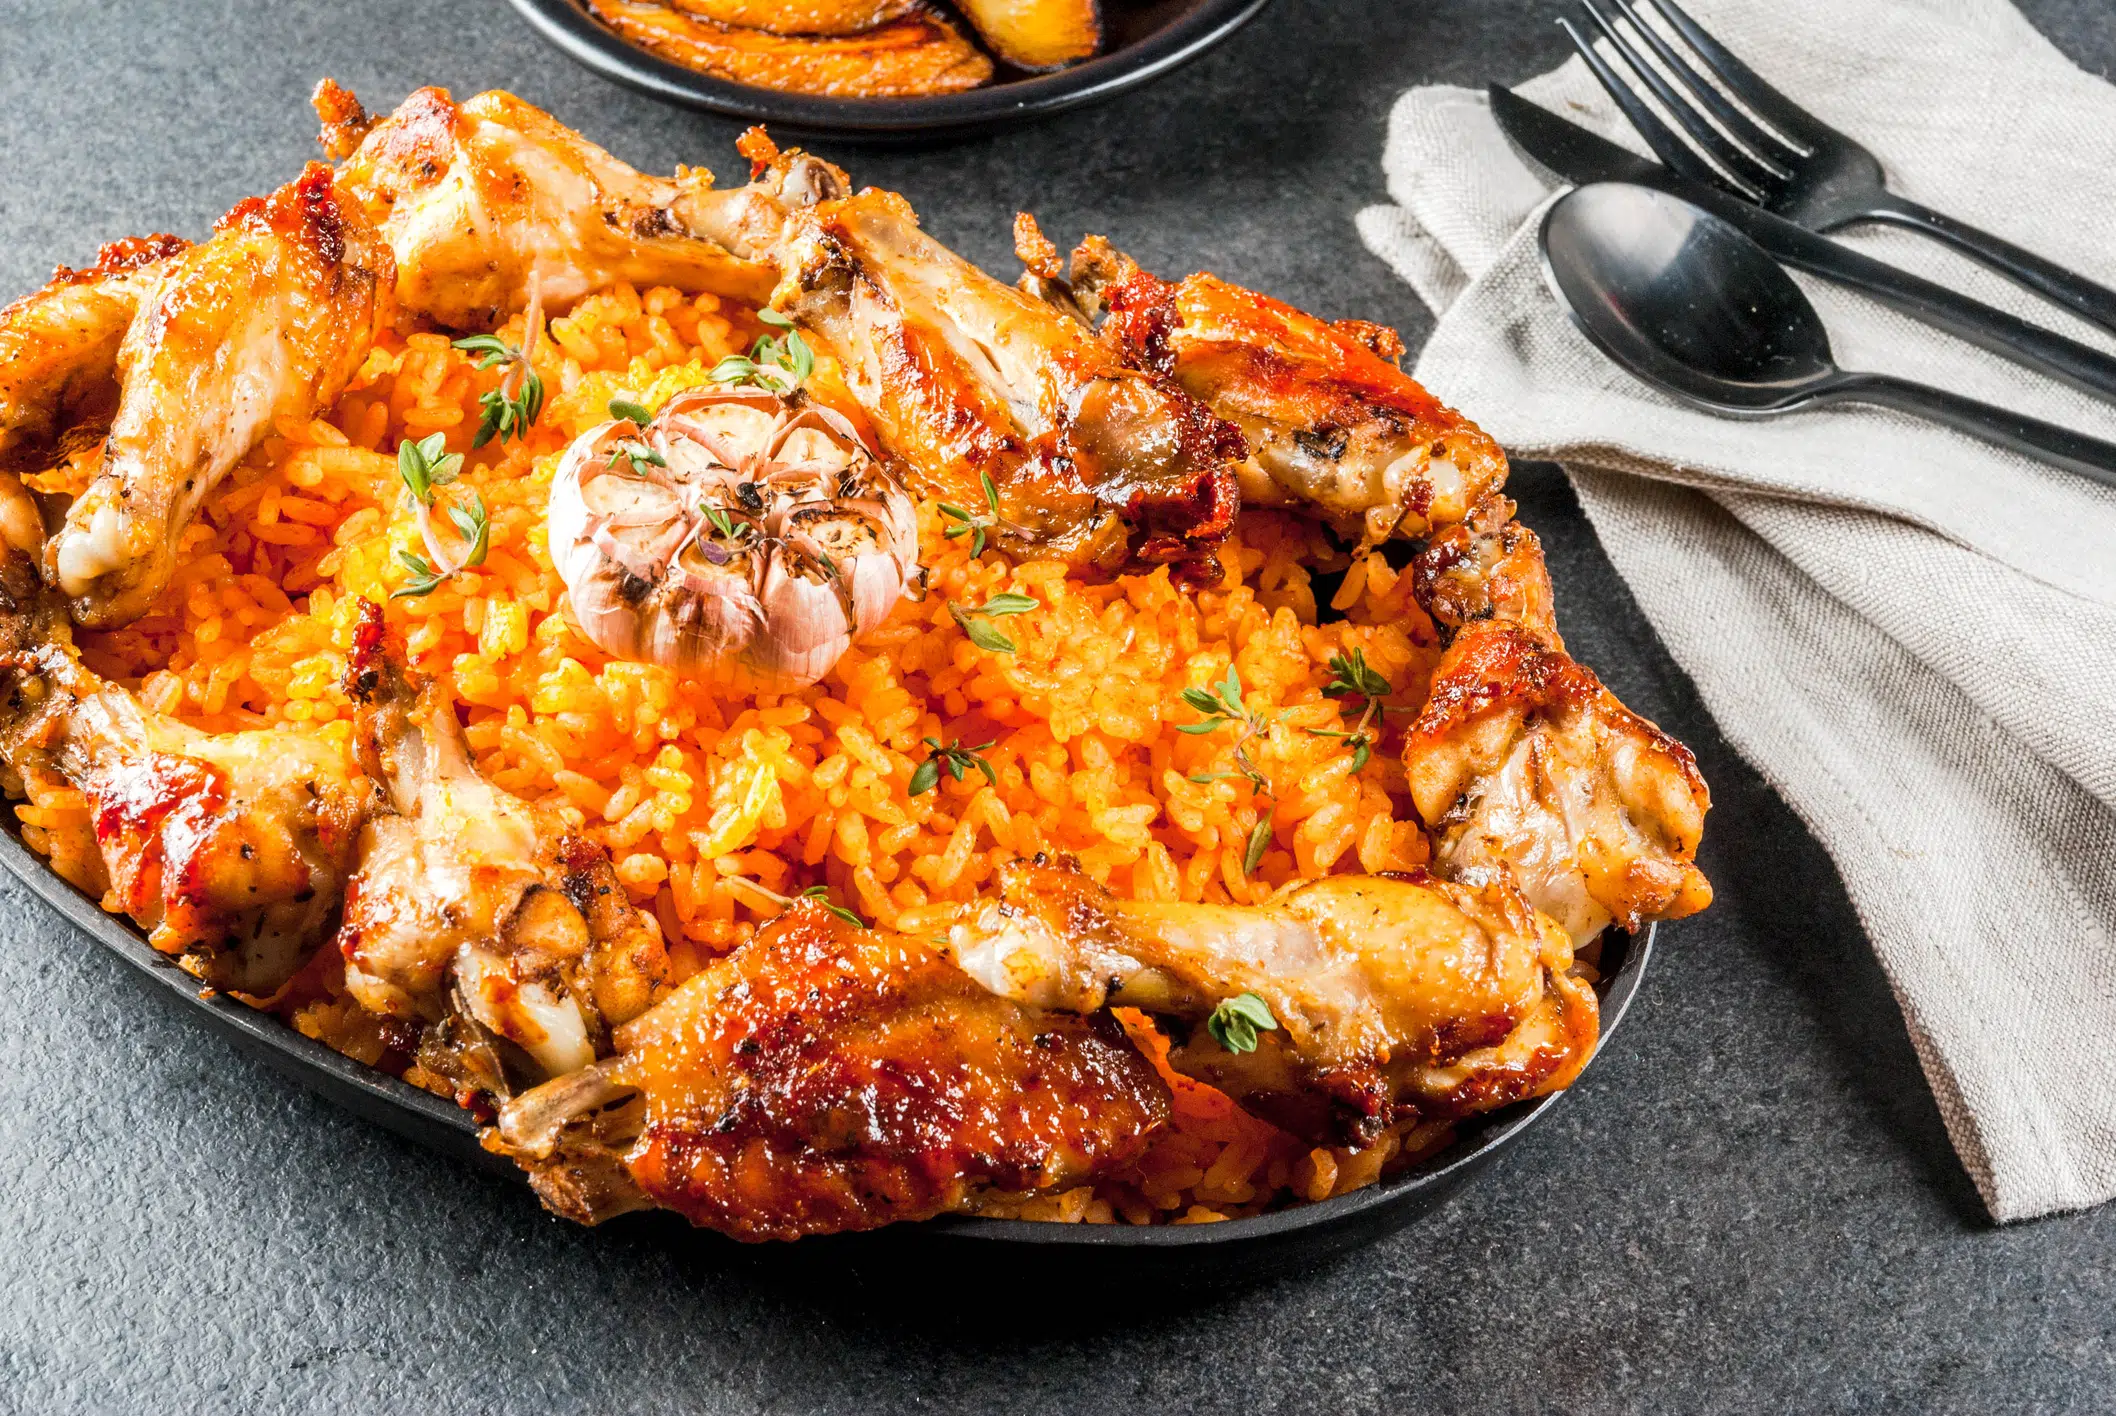 West African national cuisine. Nigeria. Jollof rice with grilled chicken wings and fried bananas plantains.